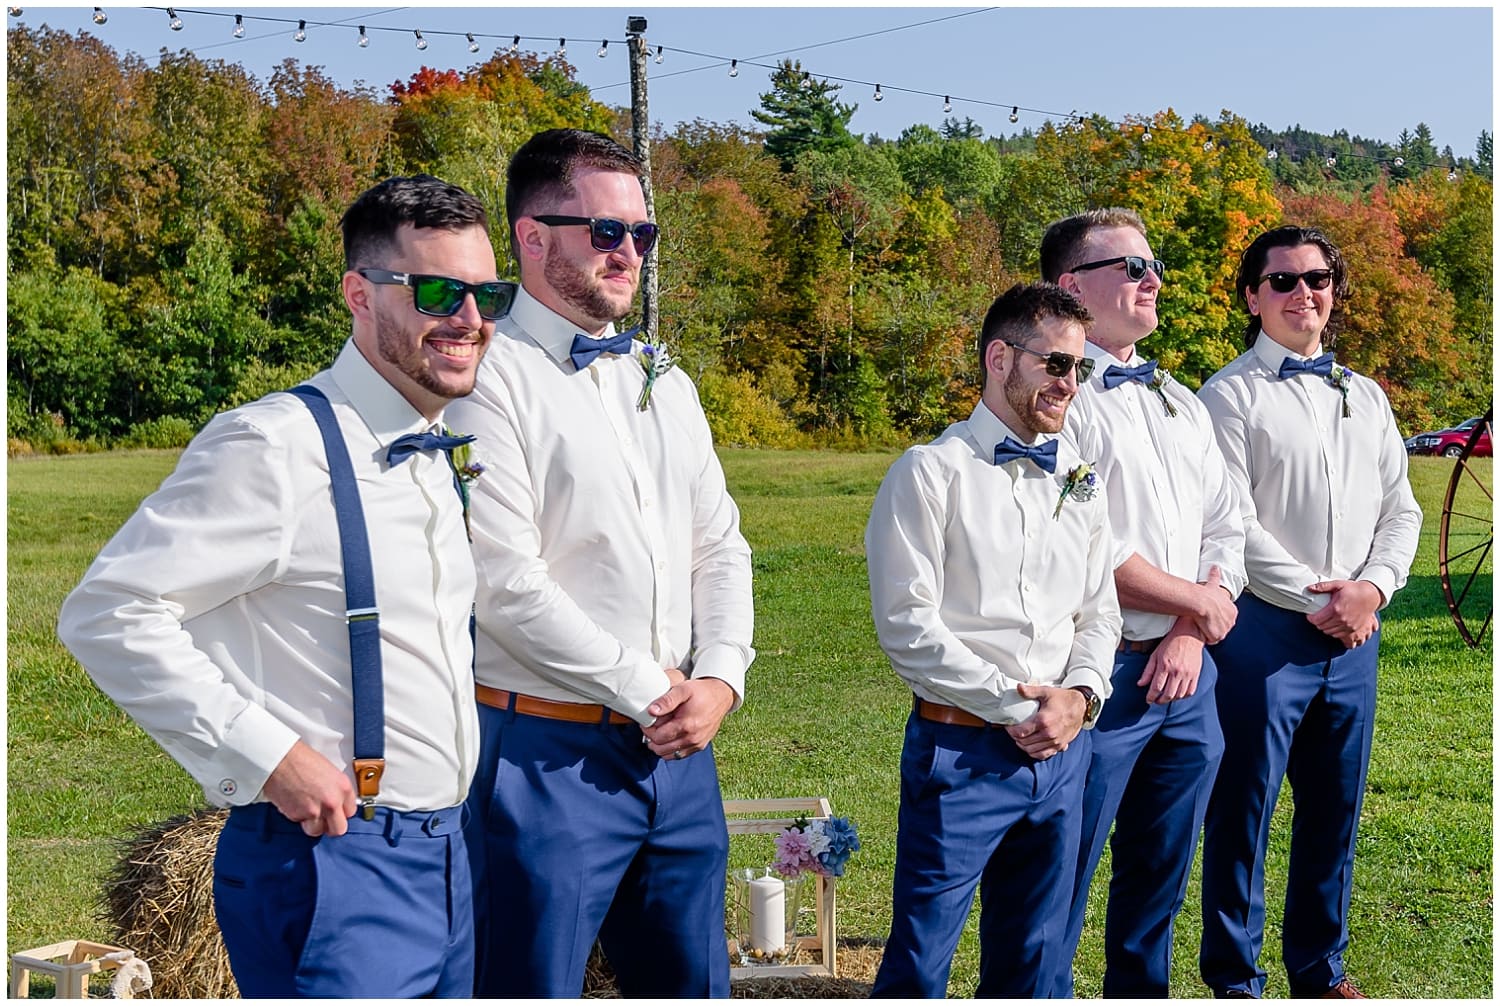 The groom stands with his groomsmen waiting for his bride to walk up the aisle during his rustic barn wedding ceremony at the Barn at Sadie Belle Farm.